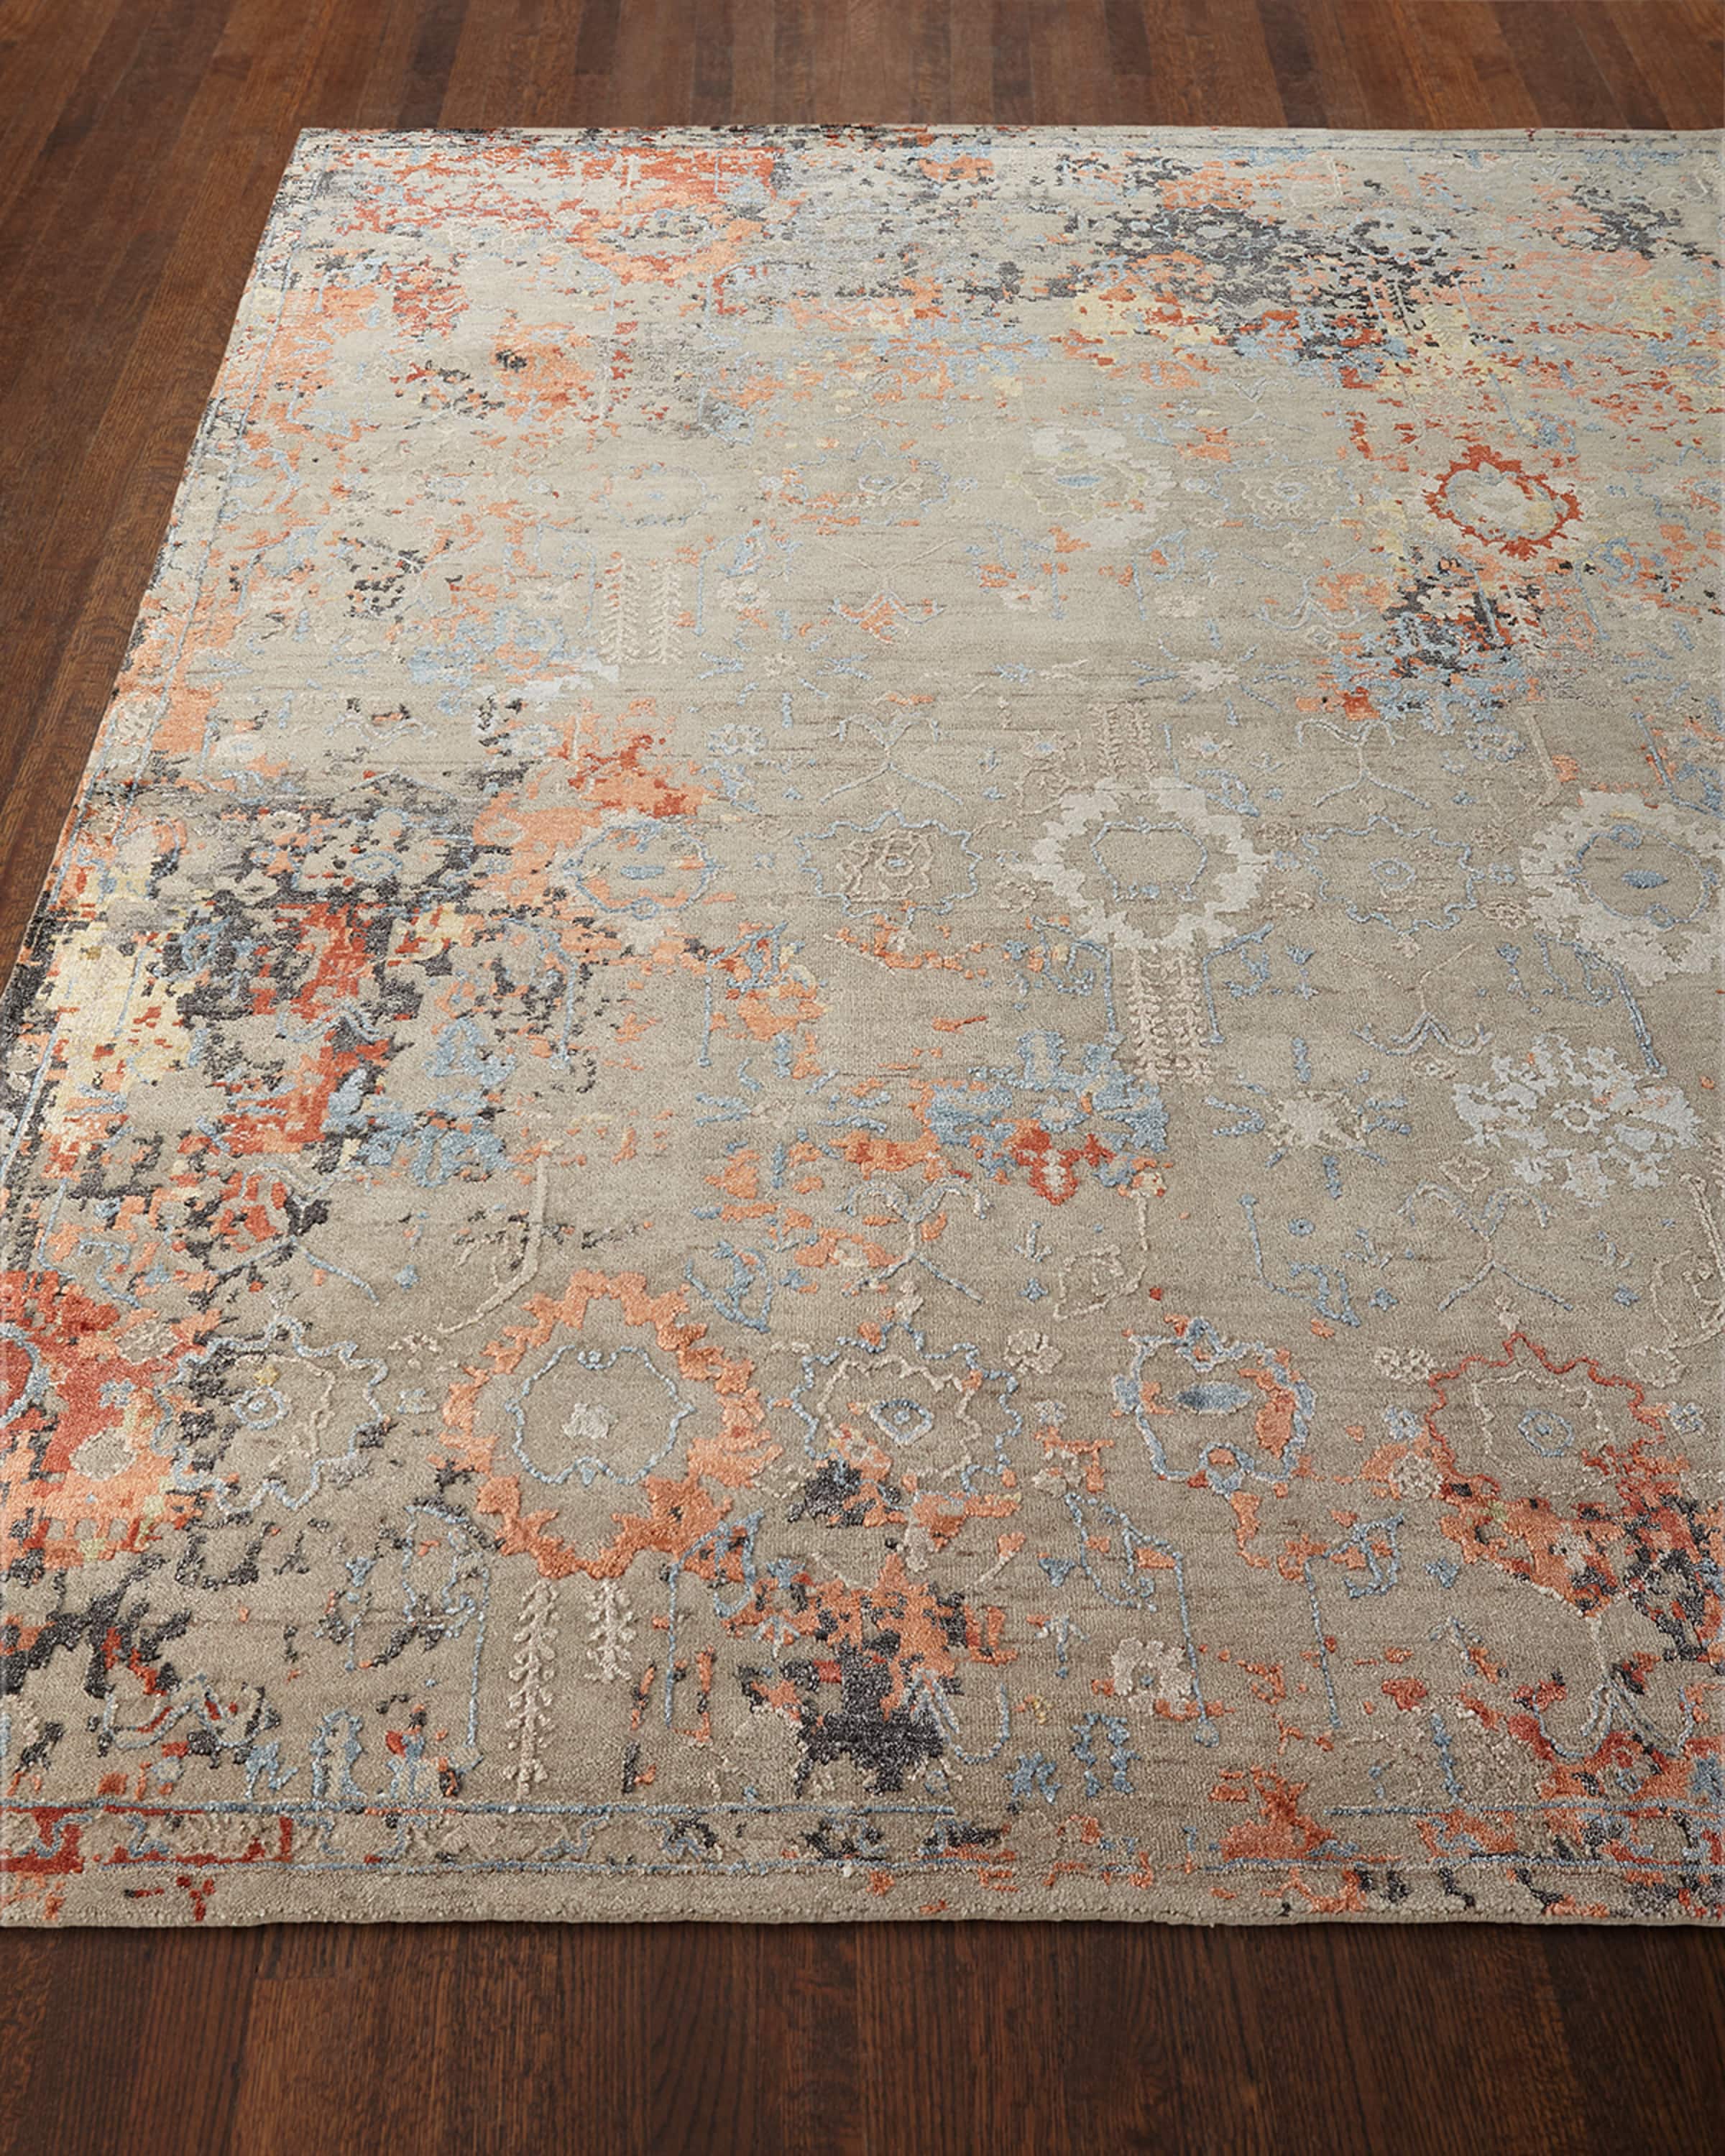 Jenzyn Hand-Knotted Rug, 10' x 14'